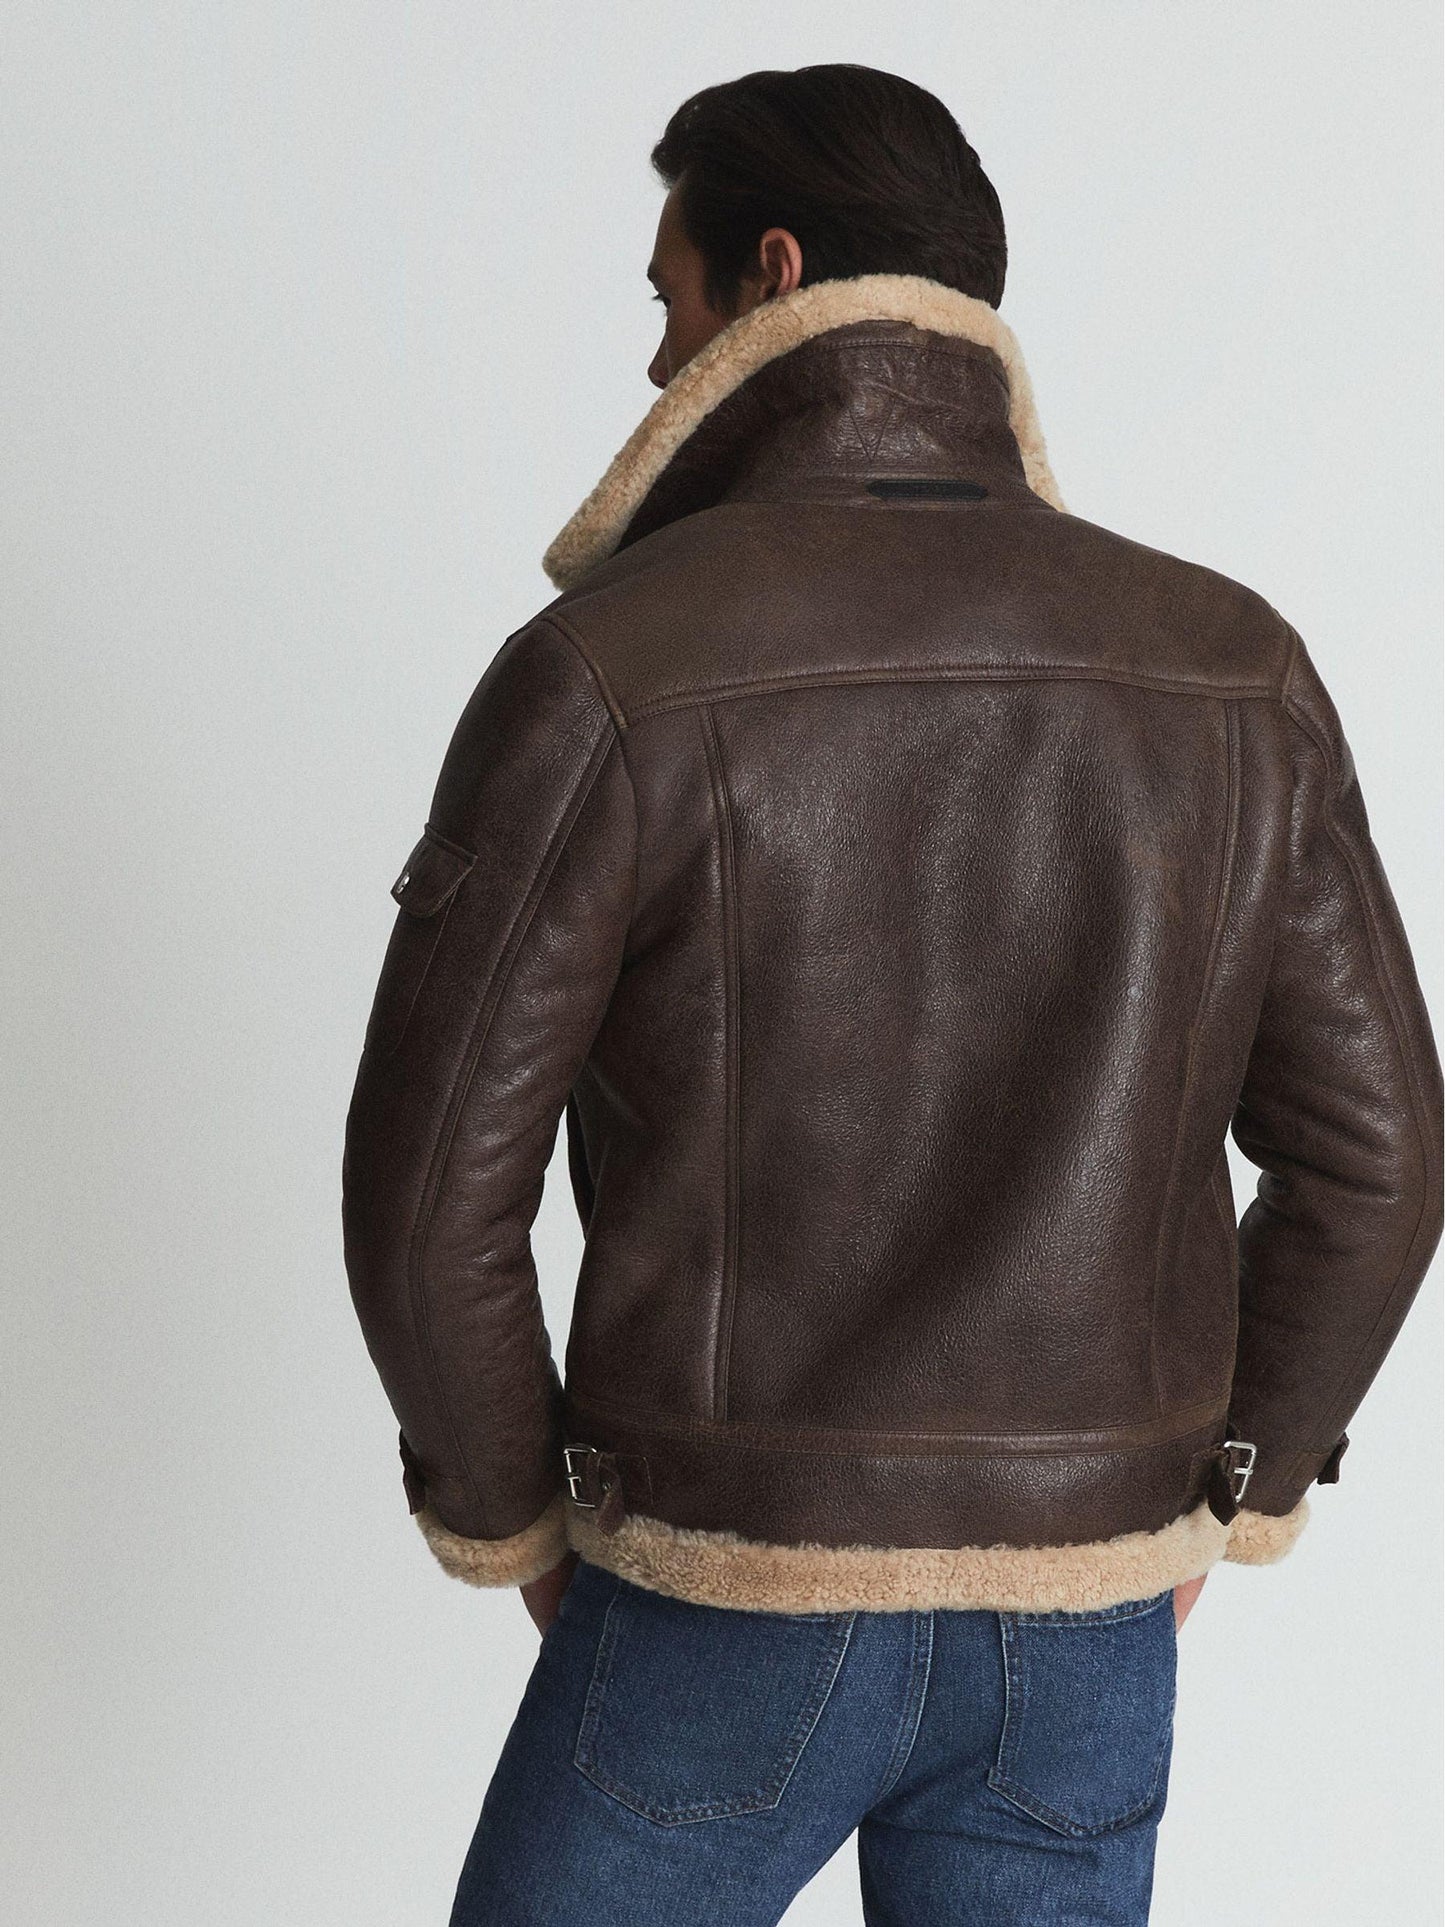 Aviator Brown Leather Jacket with Shearling Collar - Leather Loom